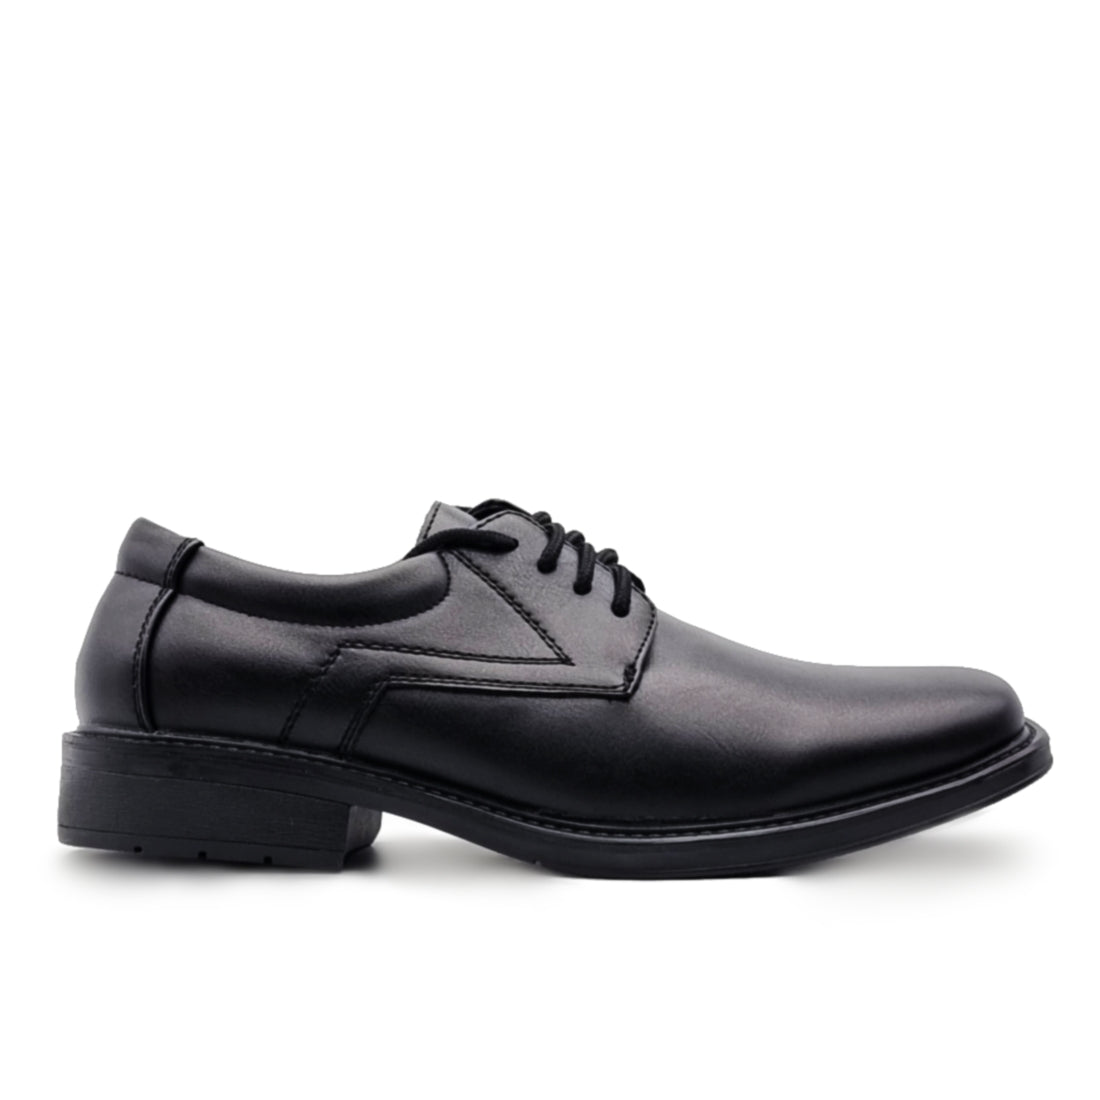 Formal Square Toe Derby Shoes